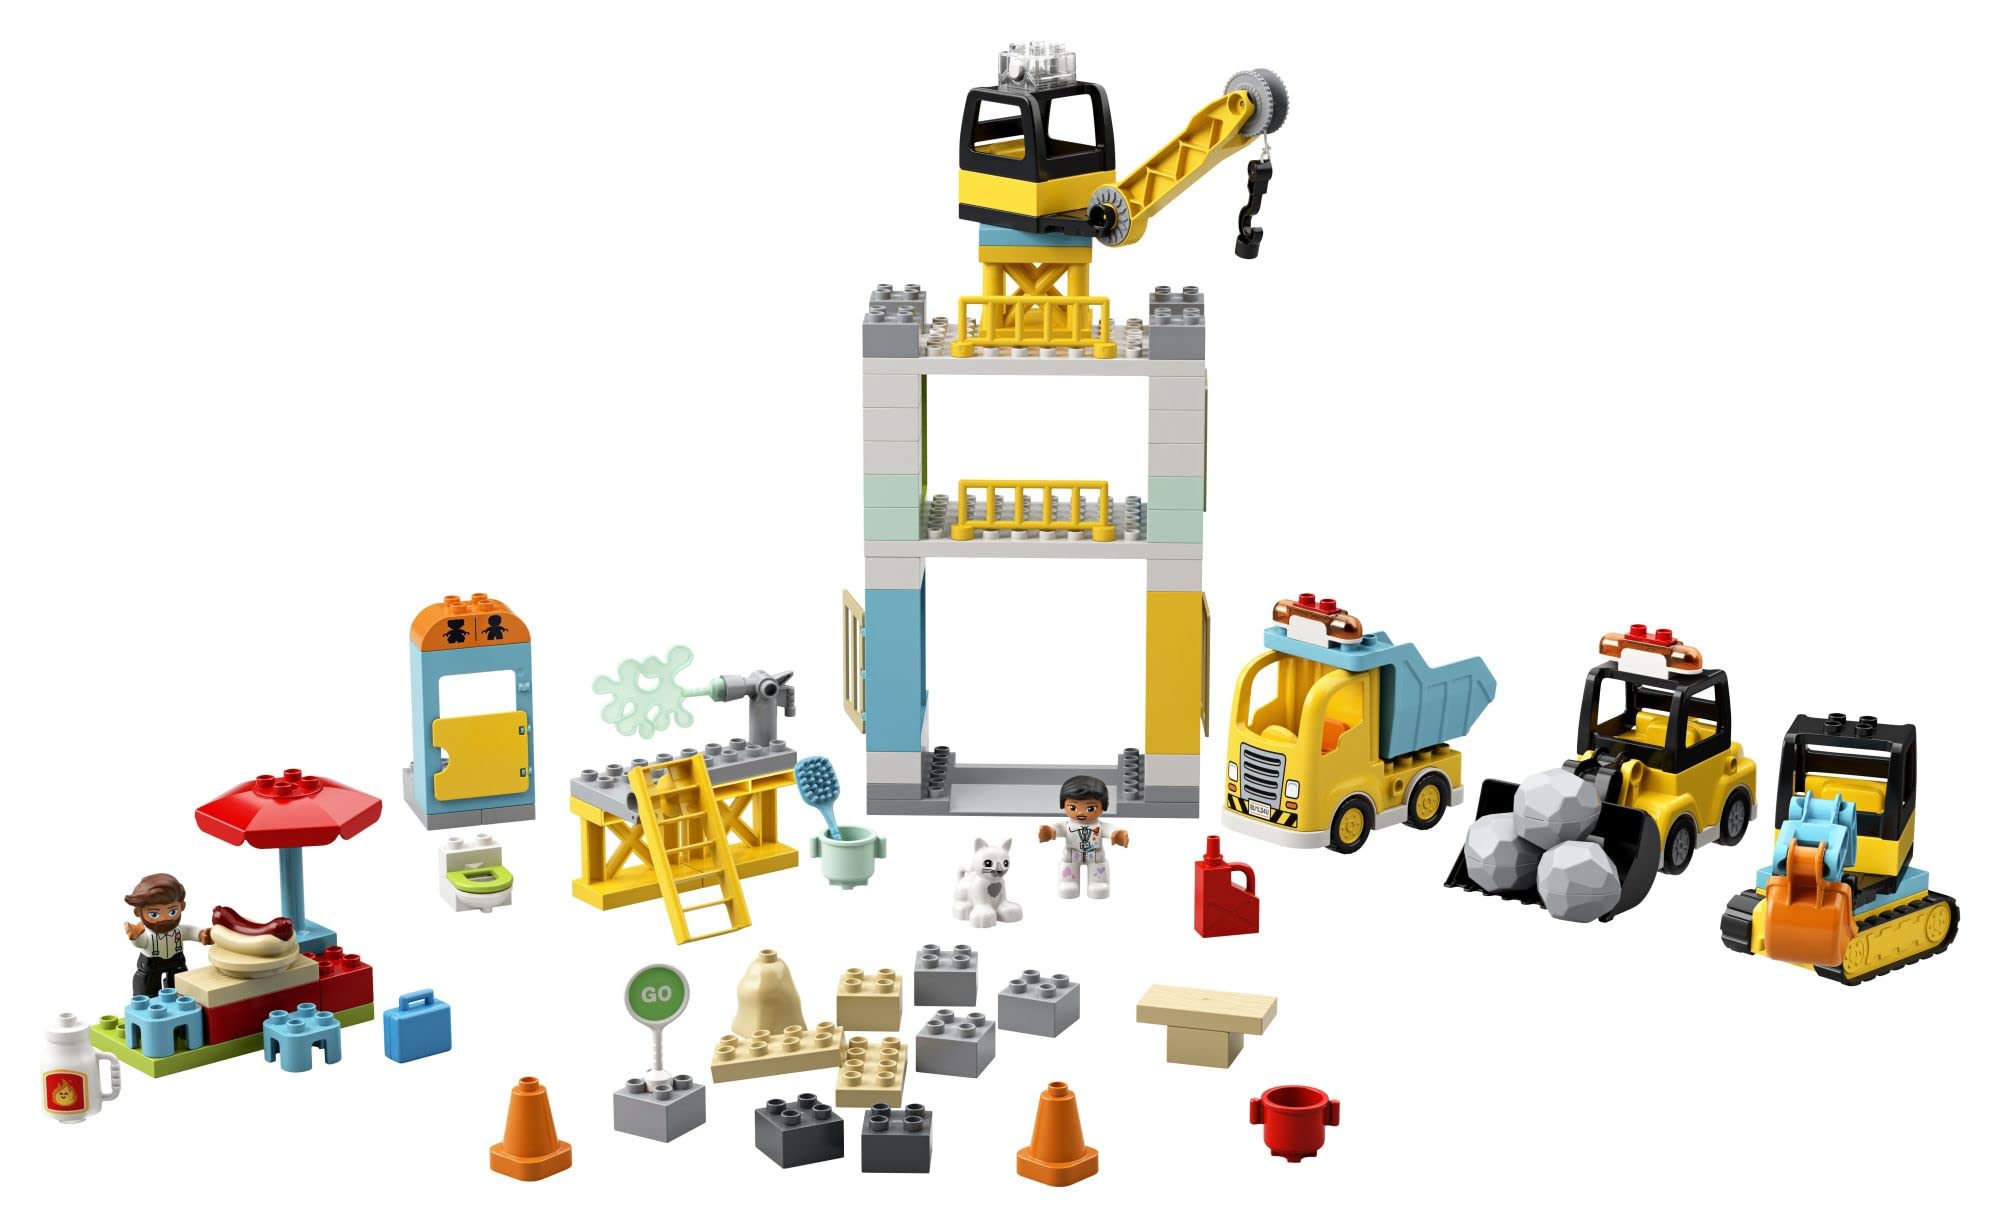 LEGO DUPLO Construction Tower Crane & Construction 10933 Creative Building Playset with Toy Vehicles; Build Fine Motor, Social and Emotional Skills; Gift for Toddlers (123 Pieces)